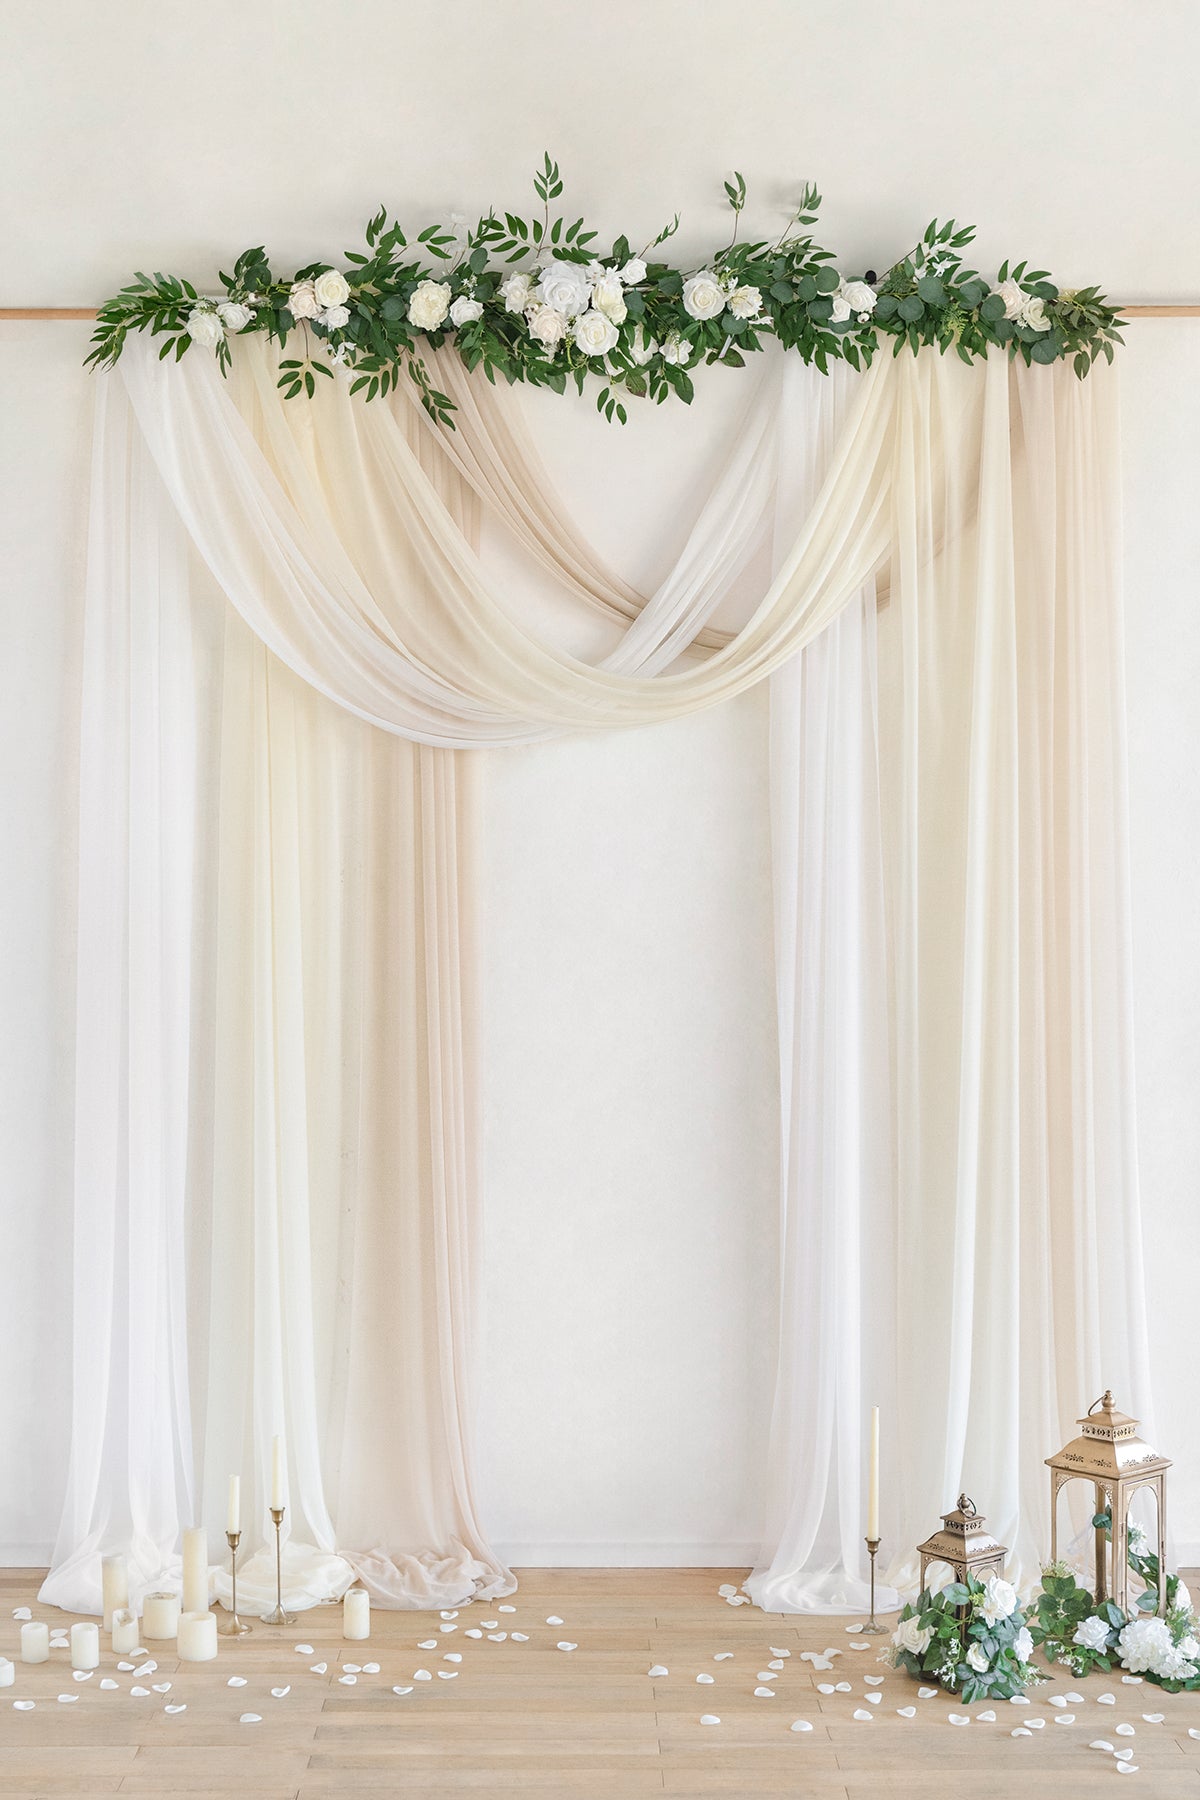 How to Choose the Right Wedding Drapery Fabric